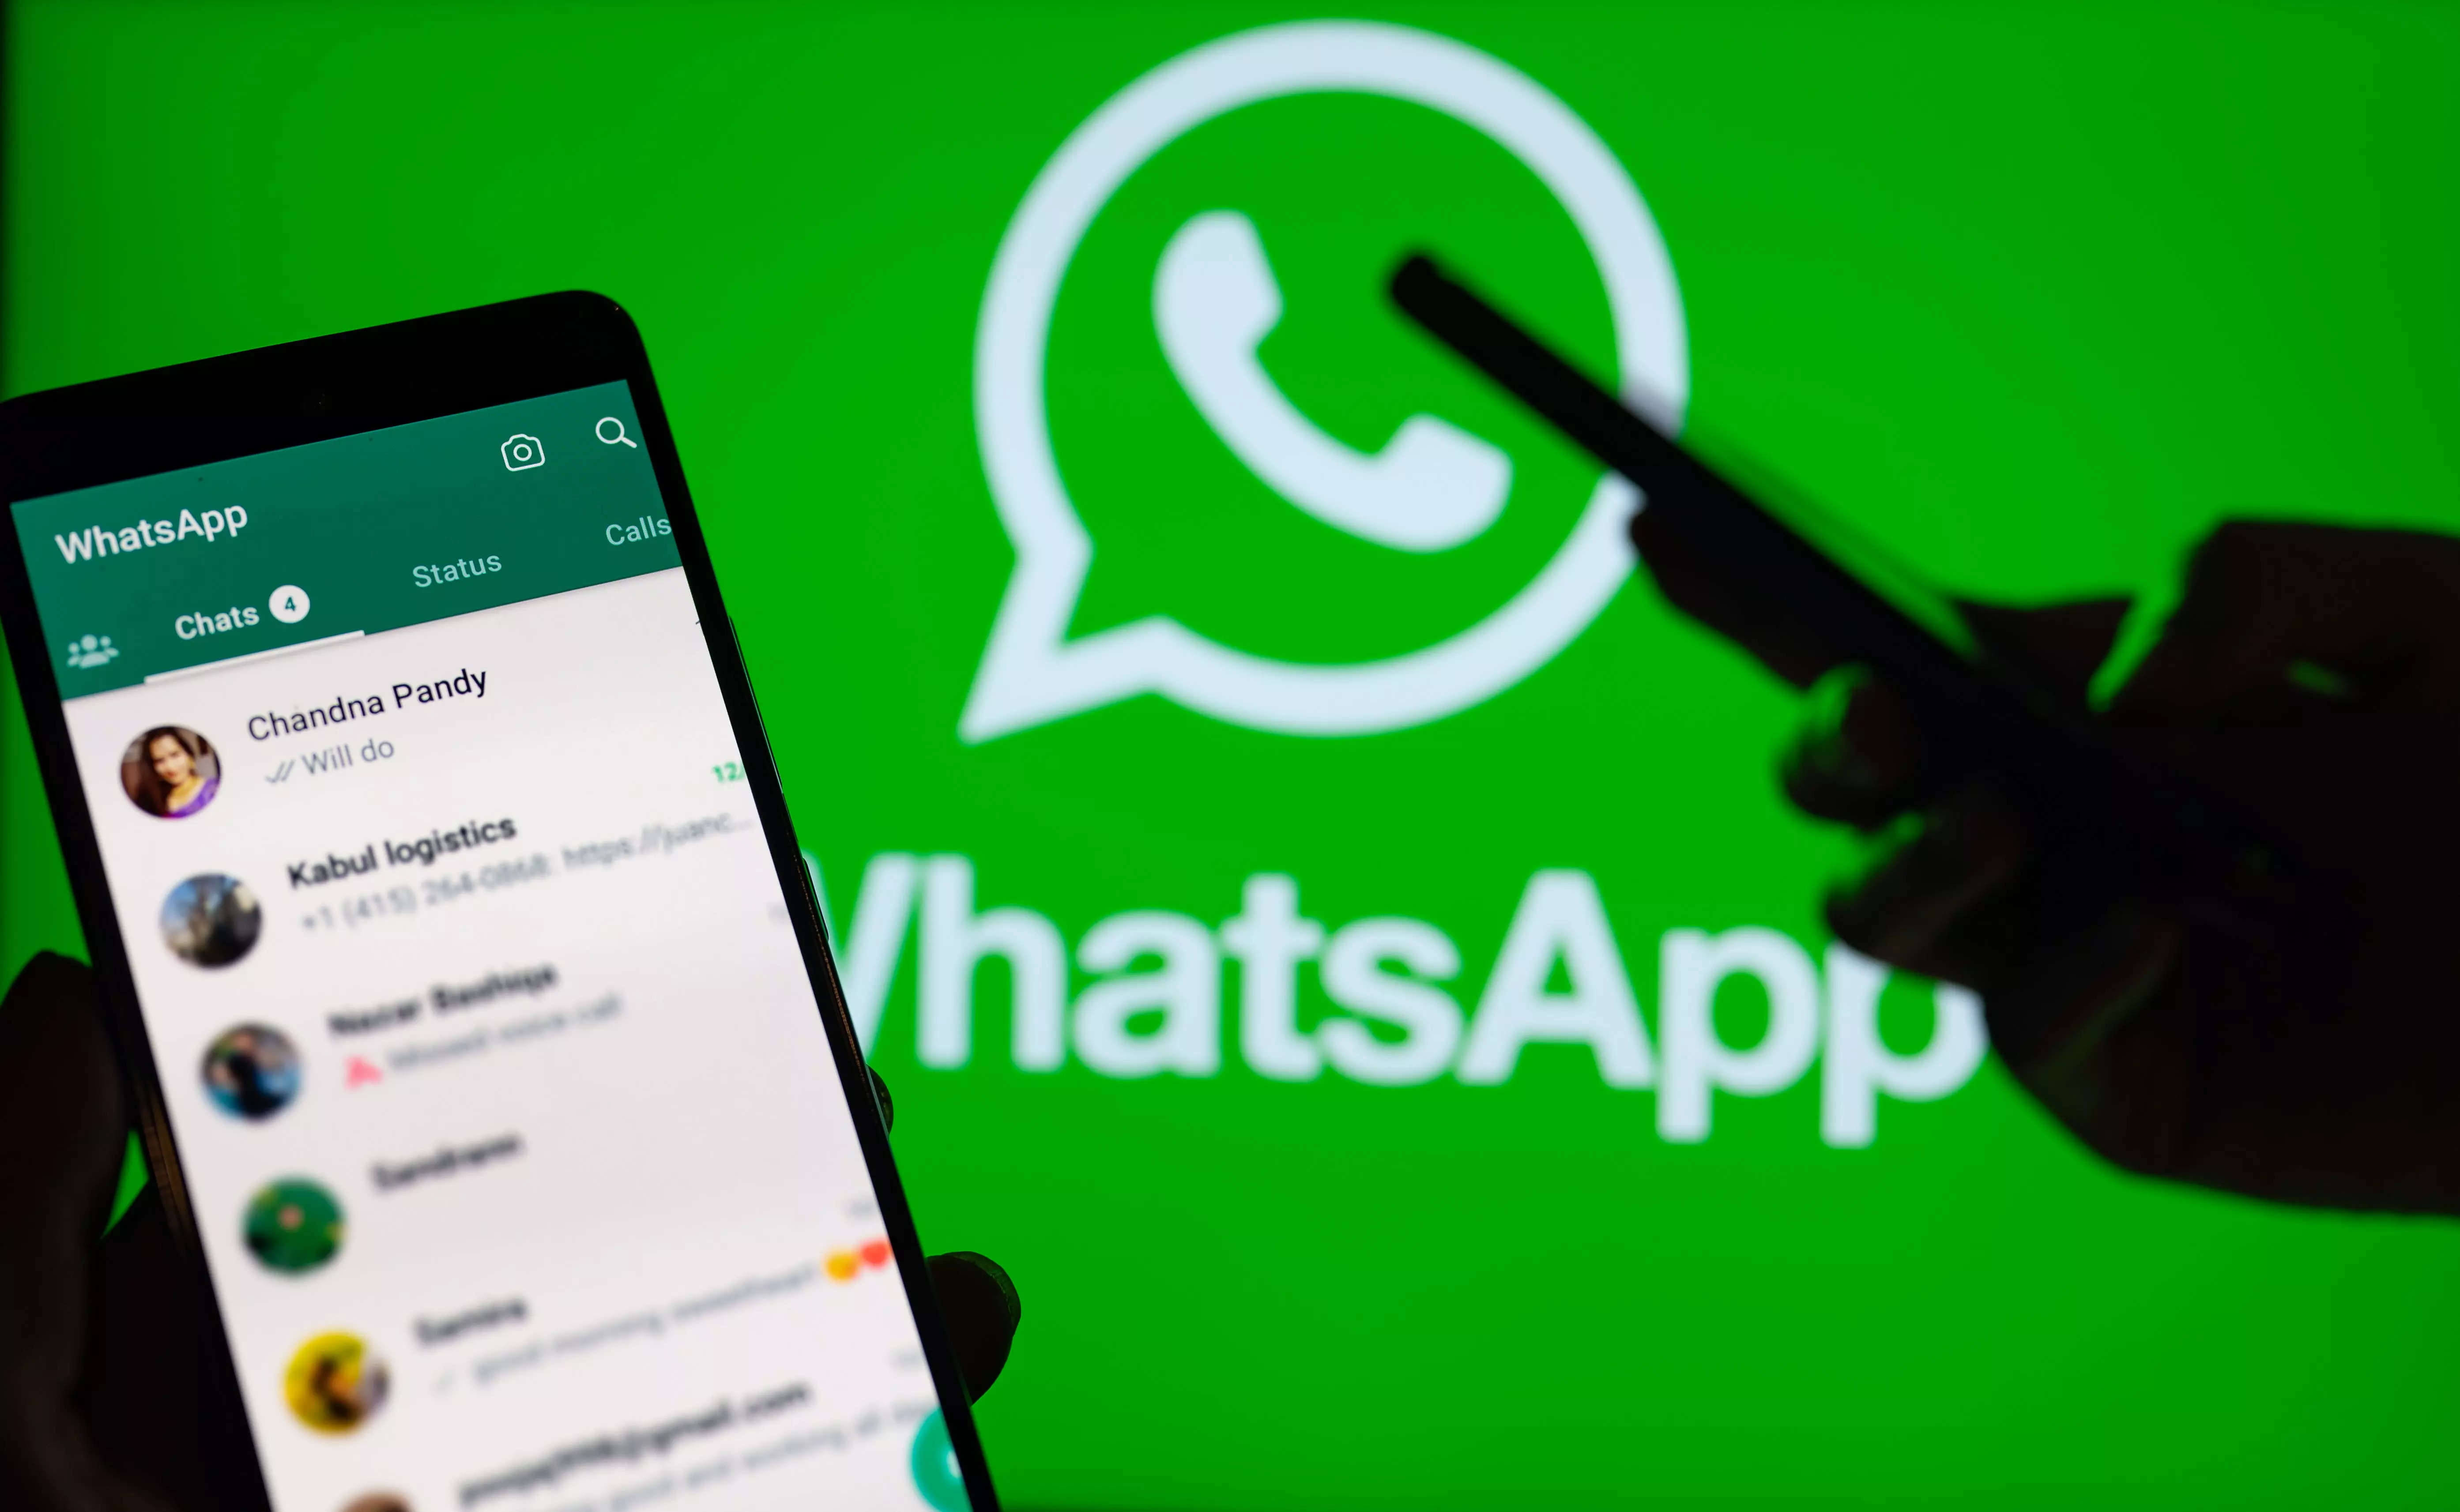 Mark Zuckerberg's Meta wants to burst Apple's blue bubbles: WhatsApp is coming for iMessage in the US